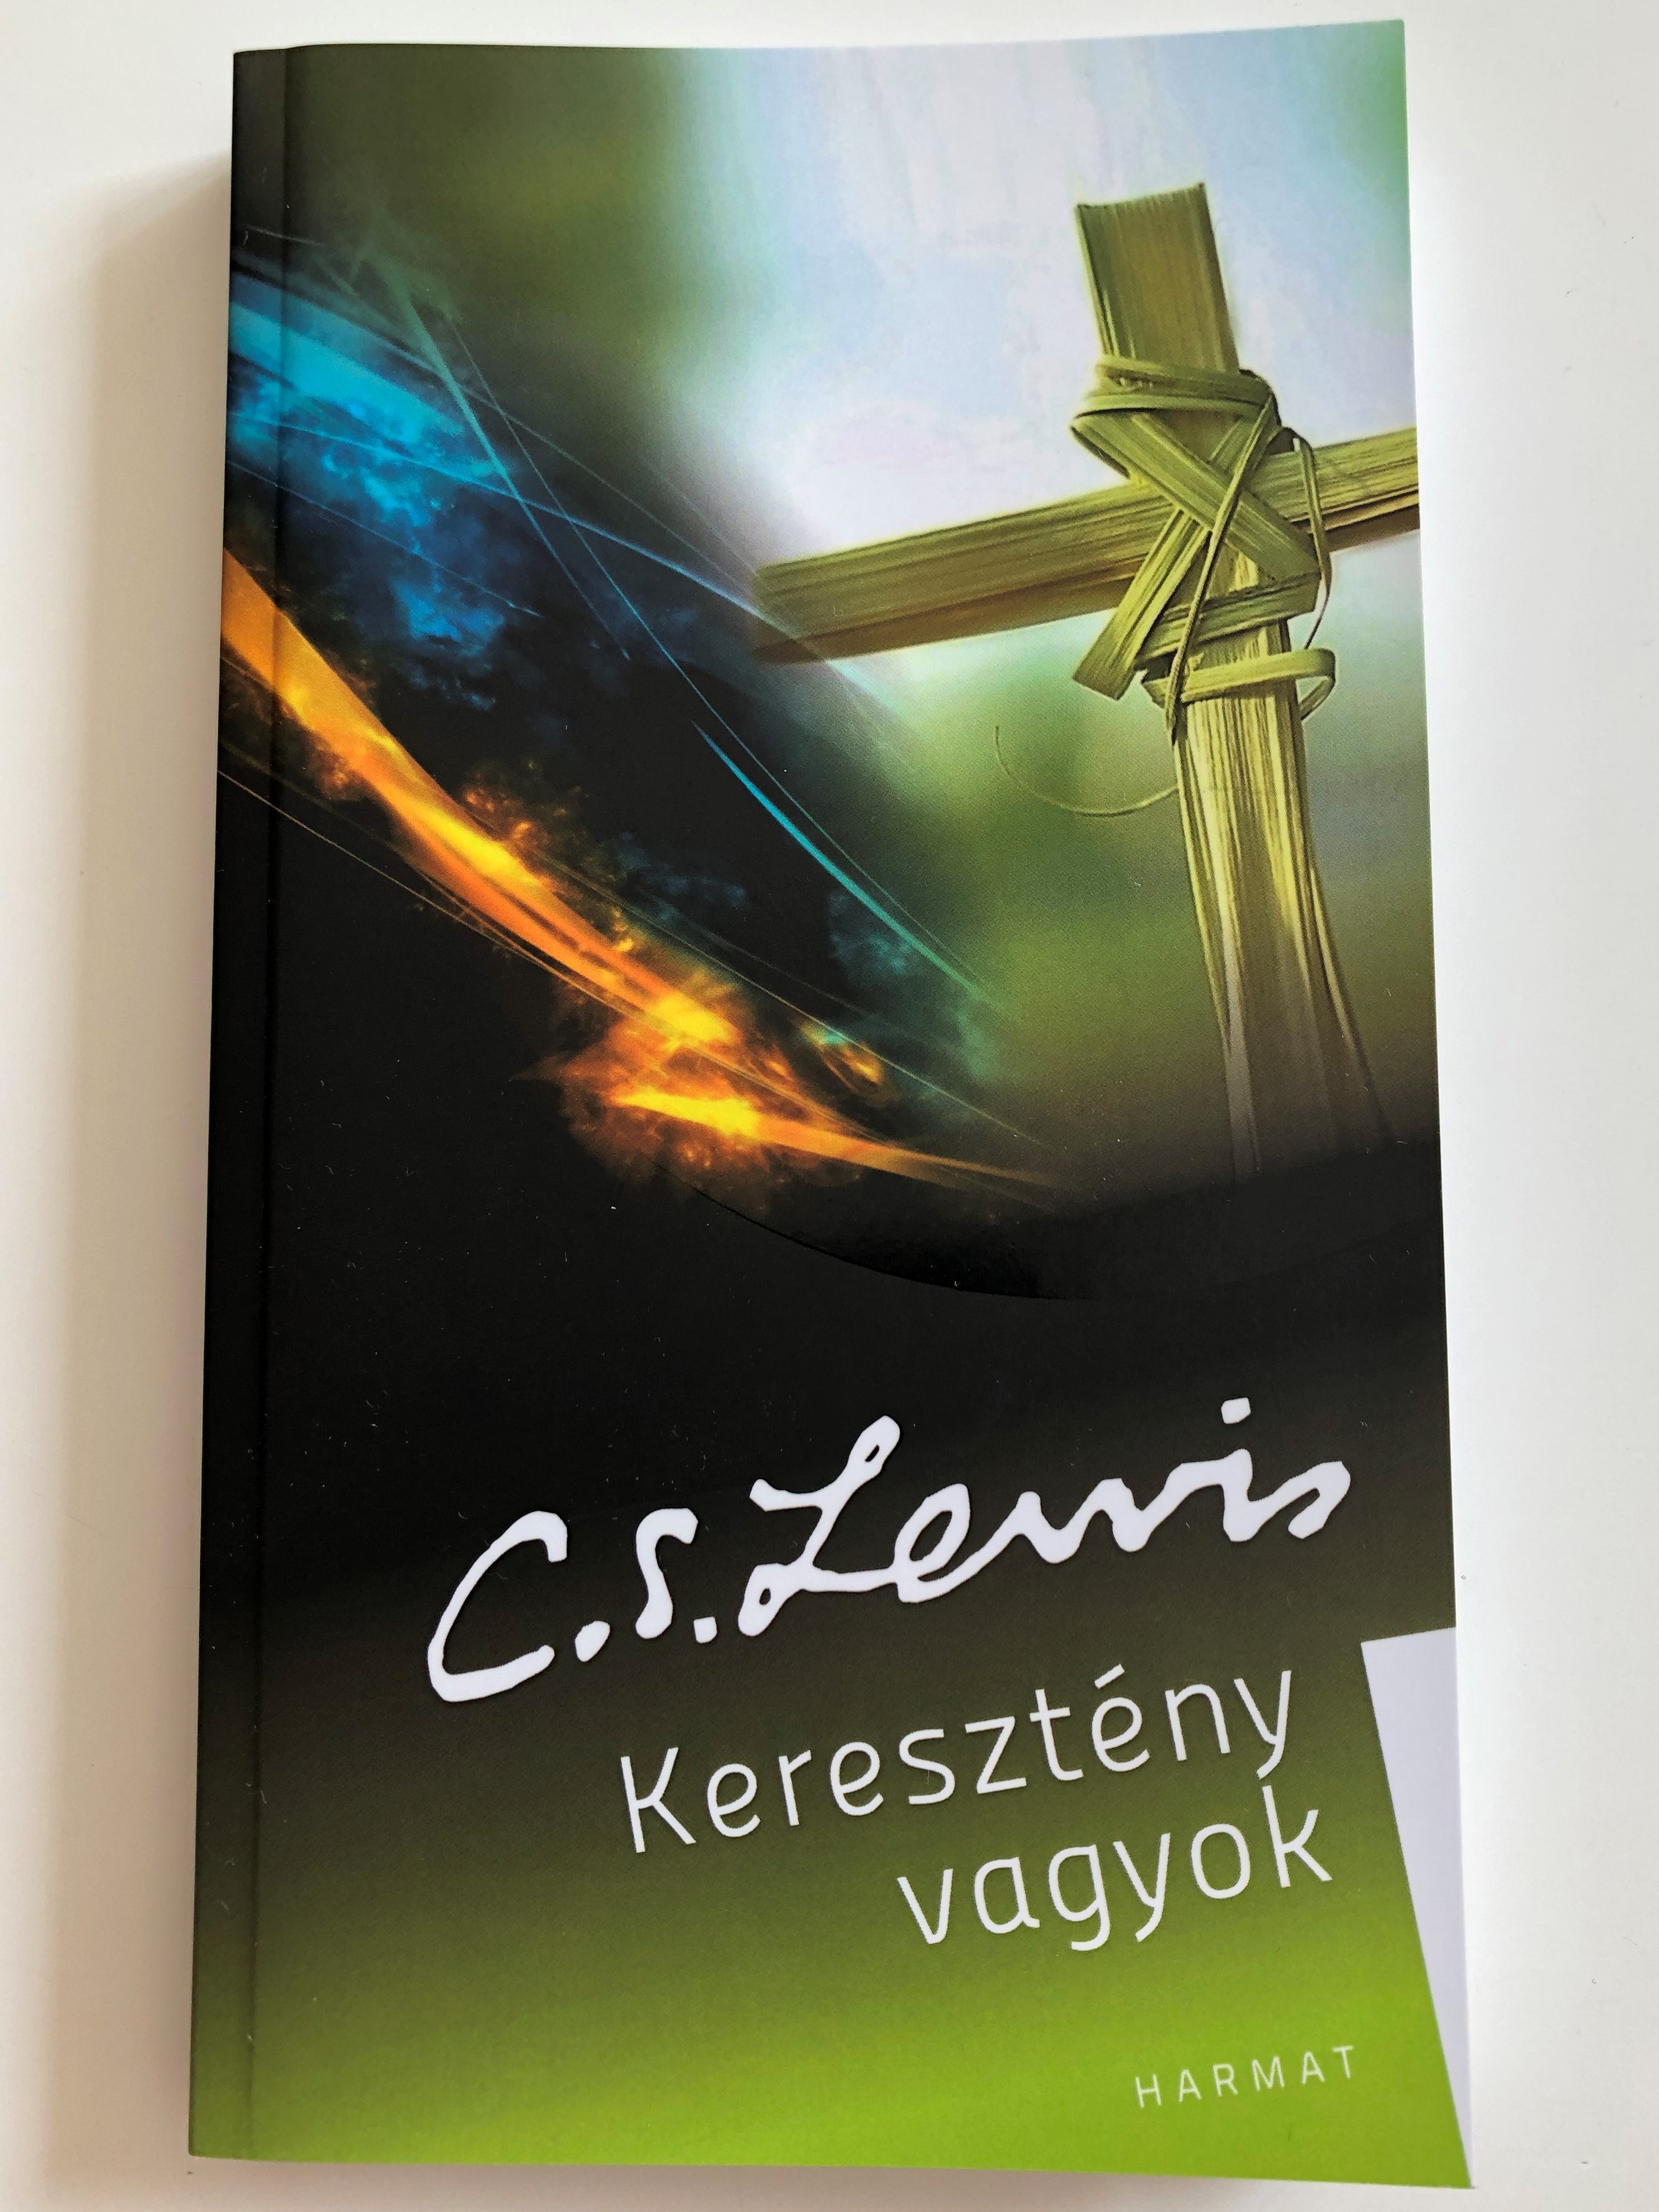 kereszt-ny-vagyok-by-c.-s.-lewis-hungarian-translation-of-mere-christianity-mere-christianity-provides-an-unequaled-opportunity-for-believers-and-nonbelievers-alike-to-hear-this-powerful-apologetic-for-the-christian-faith-1-.jpg